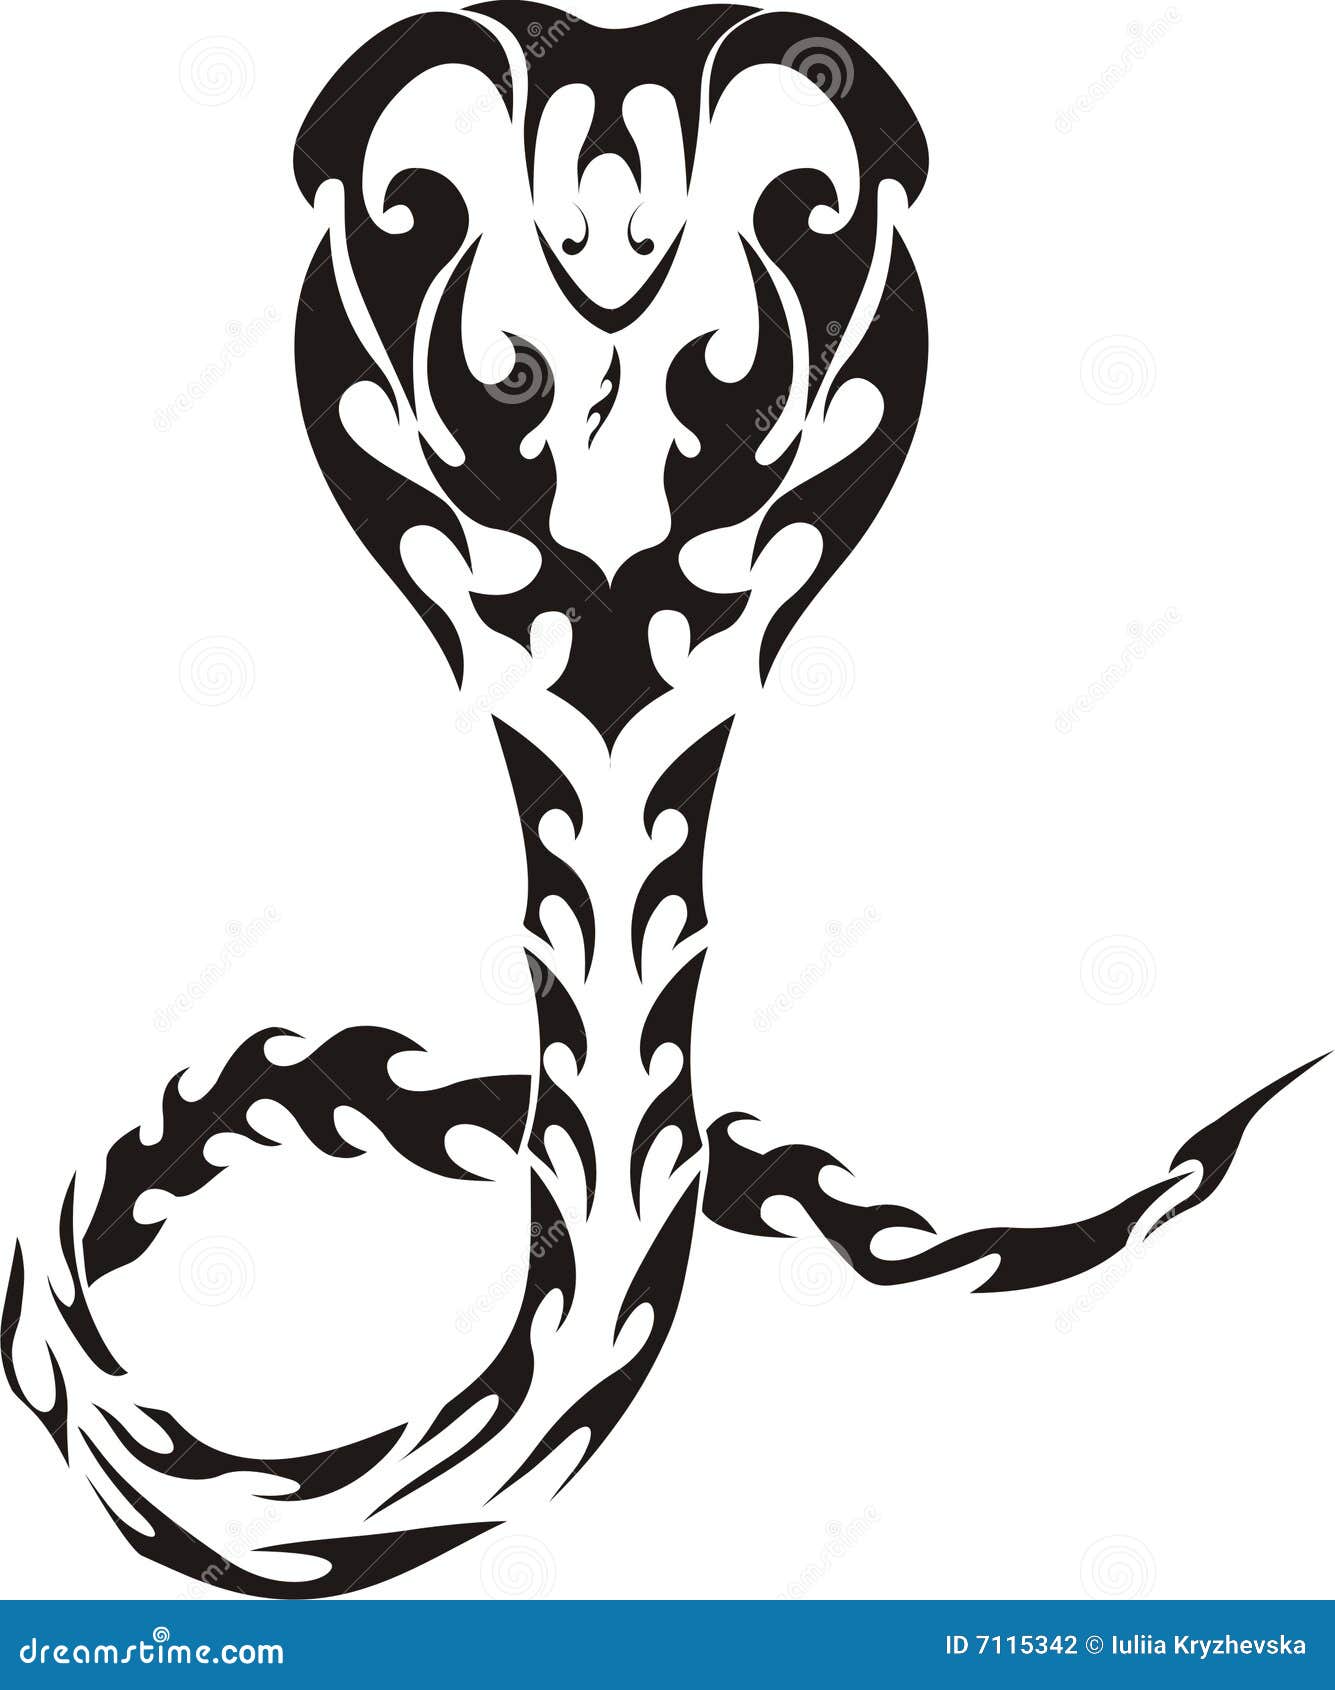 Pin on Tattoo Idea and Designs